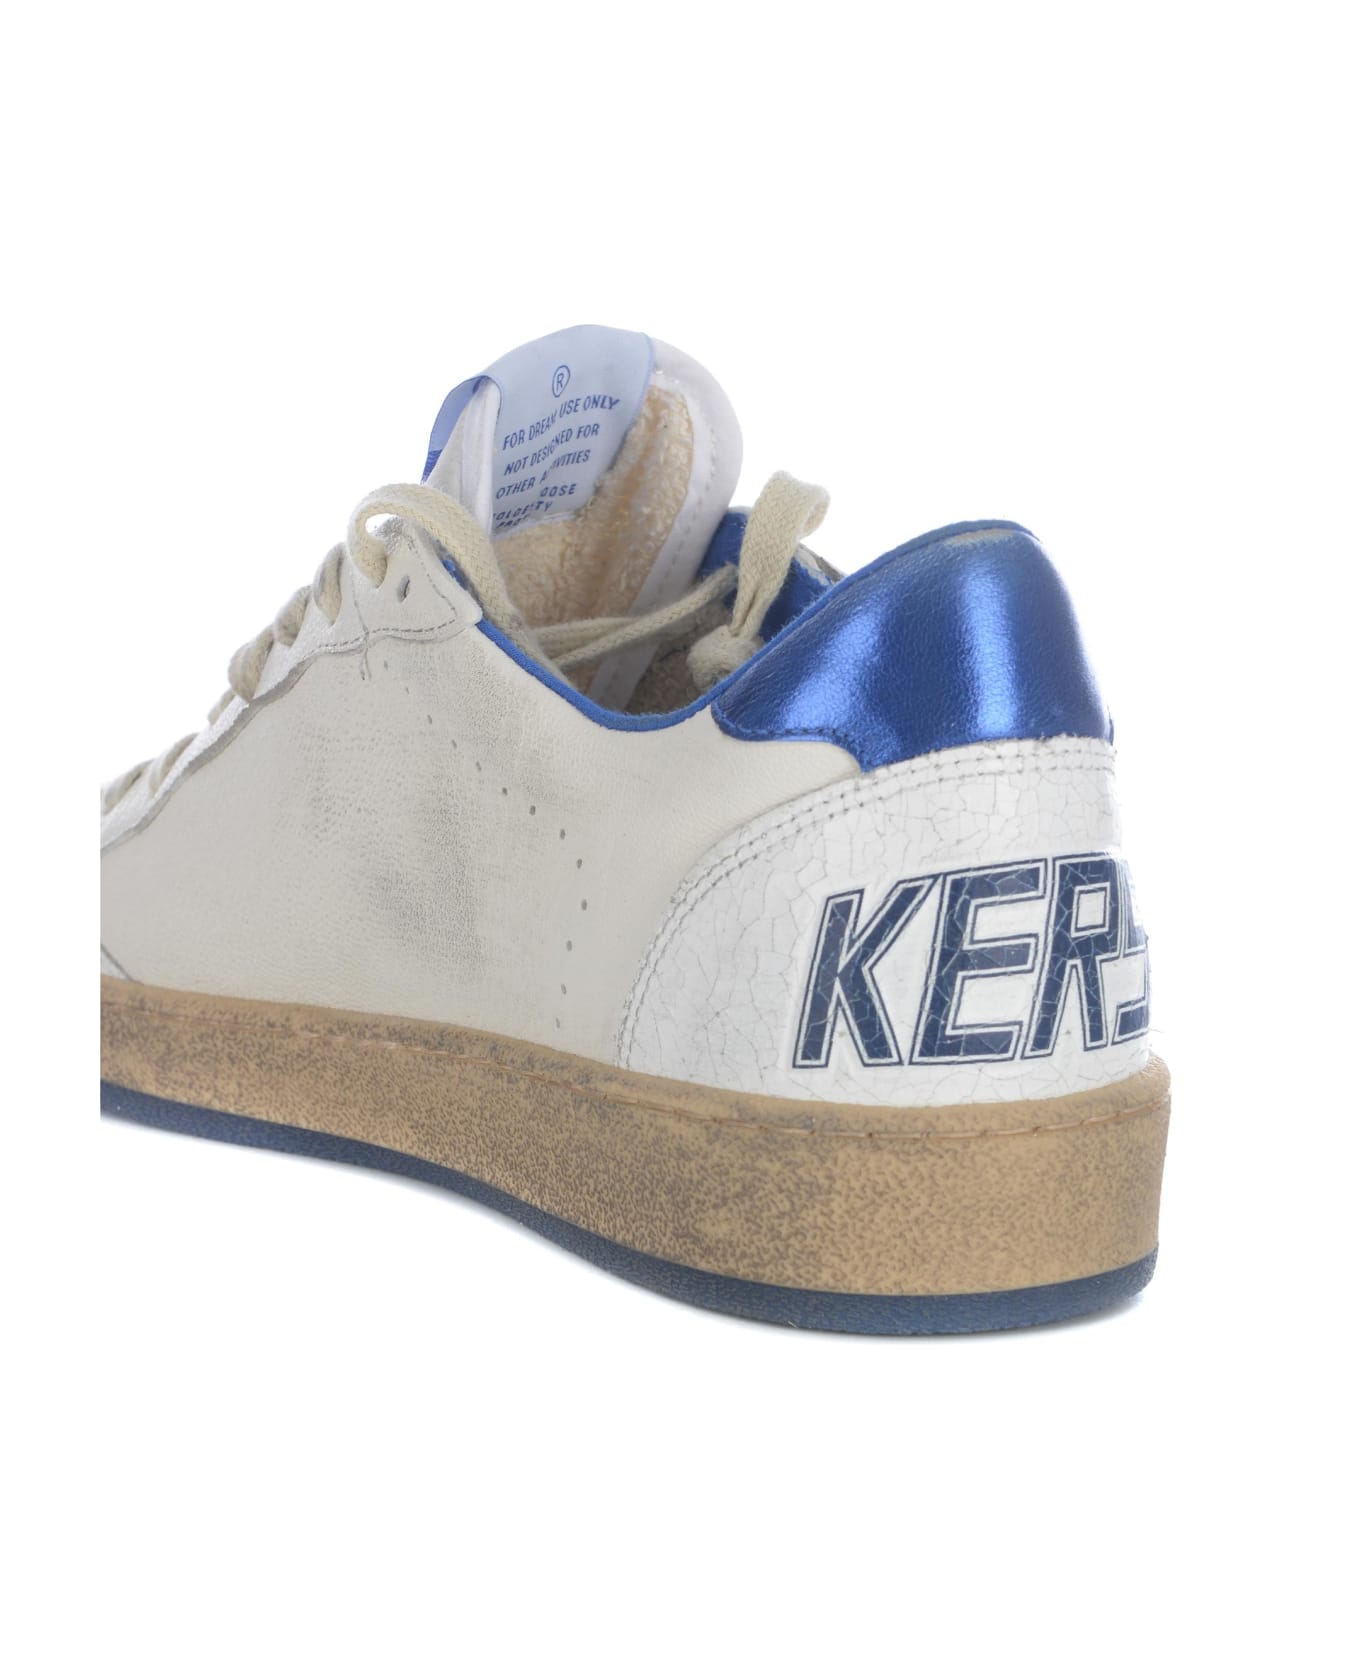 Golden Goose Sneakers Golden Goose "ball Star" Made Of Leather - Bianco/azzurro